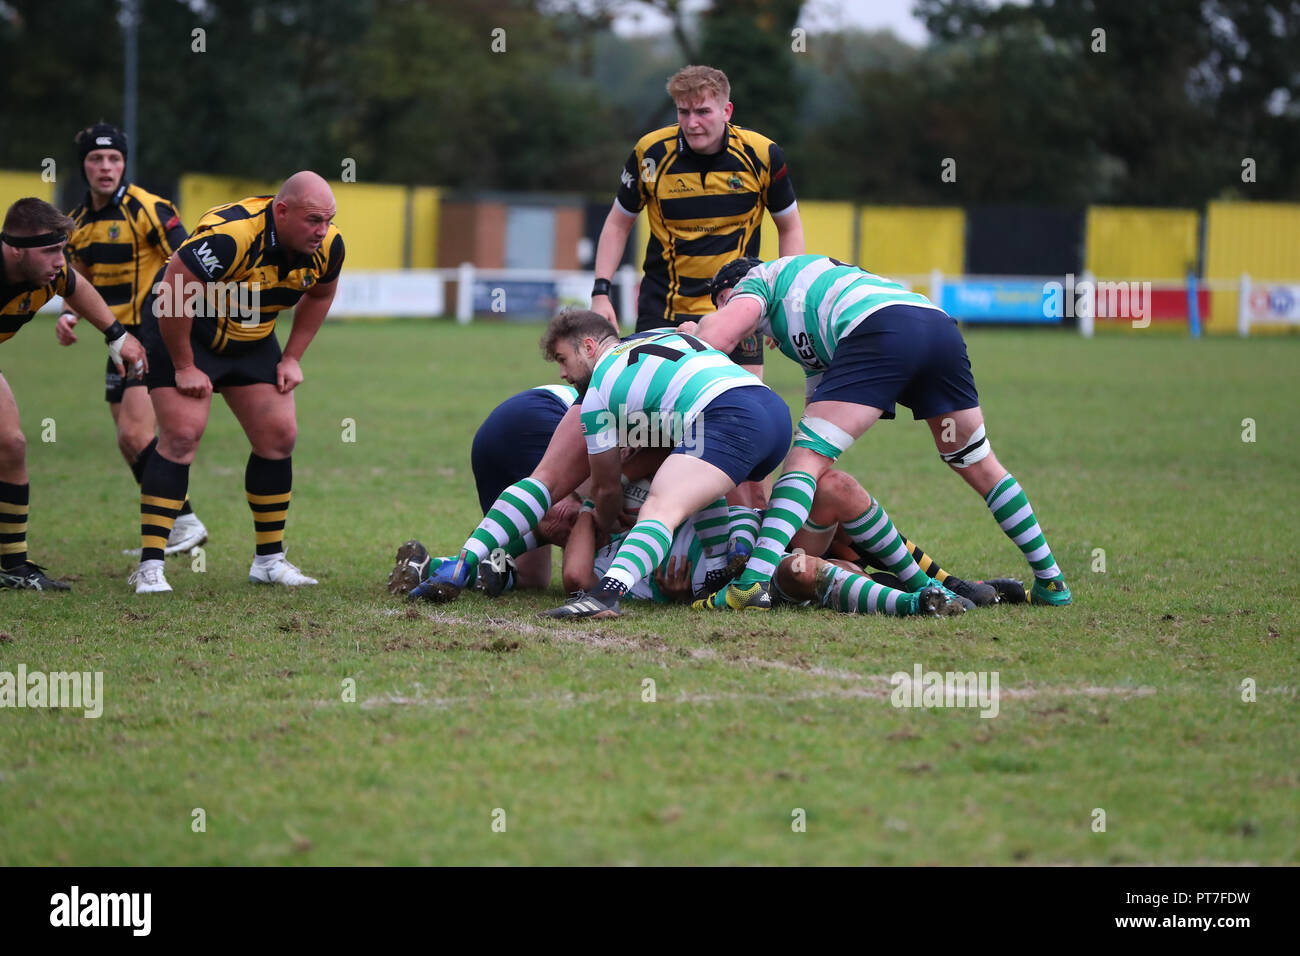 Leicester, England. Rugby Union, Hinckley rfc v South Leicester rfc.    Carl Strickson in action for South Leicester during the RFU National League 2 North (NL2N) game played at the Leicester  Road Stadium.  © Phil Hutchinson / Alamy Live News Stock Photo